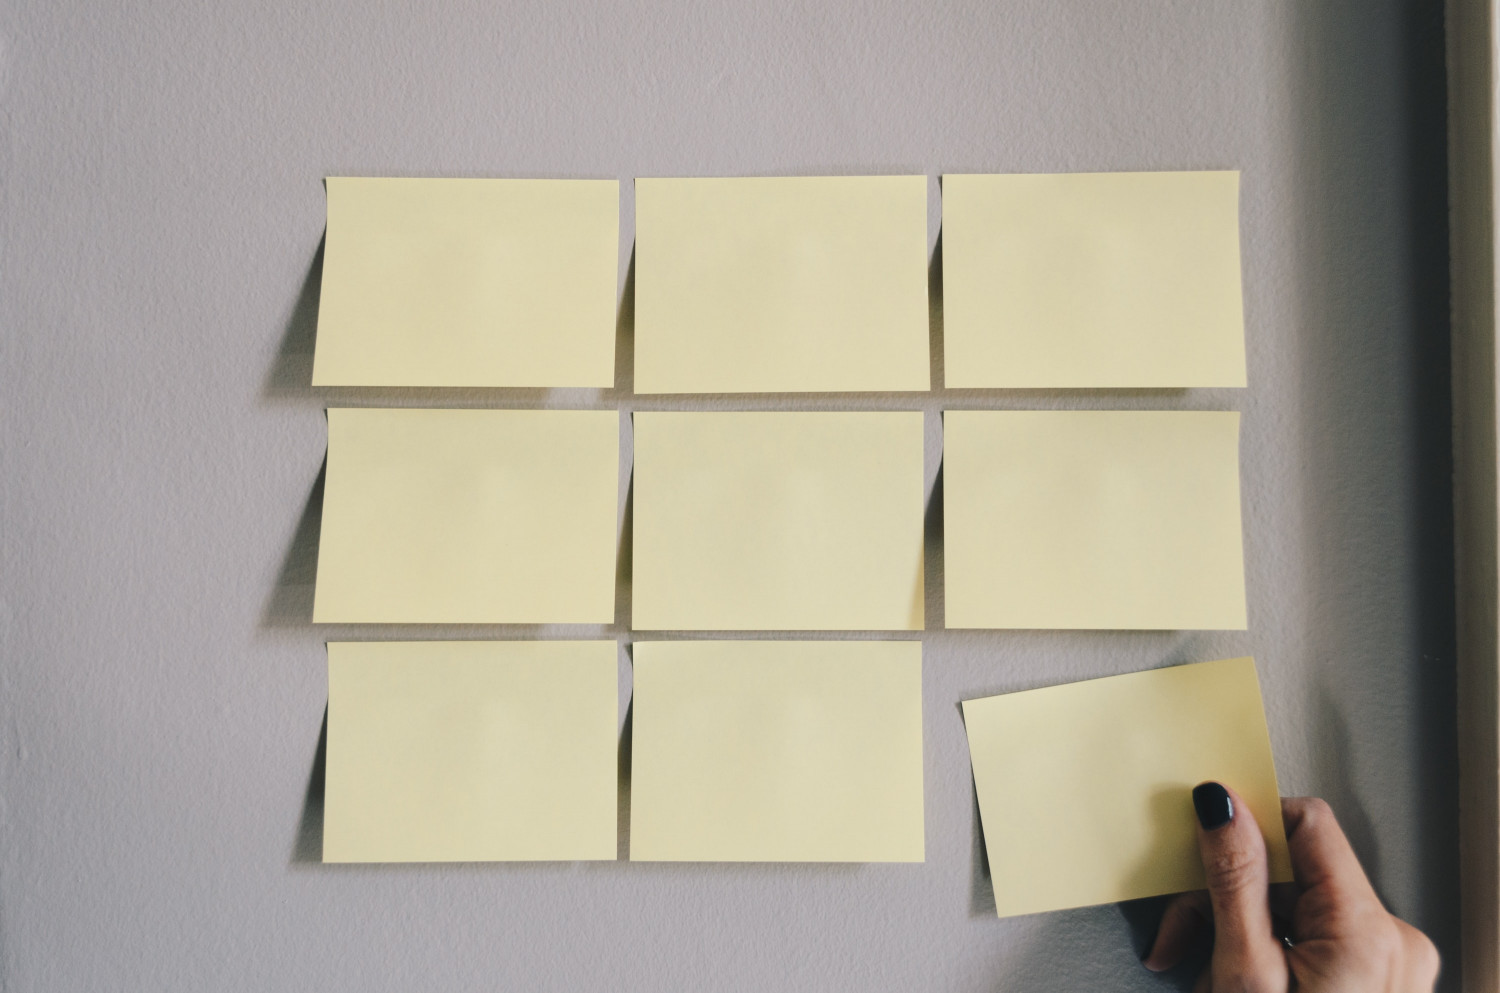 Image of Post-It notes arranged on a wall